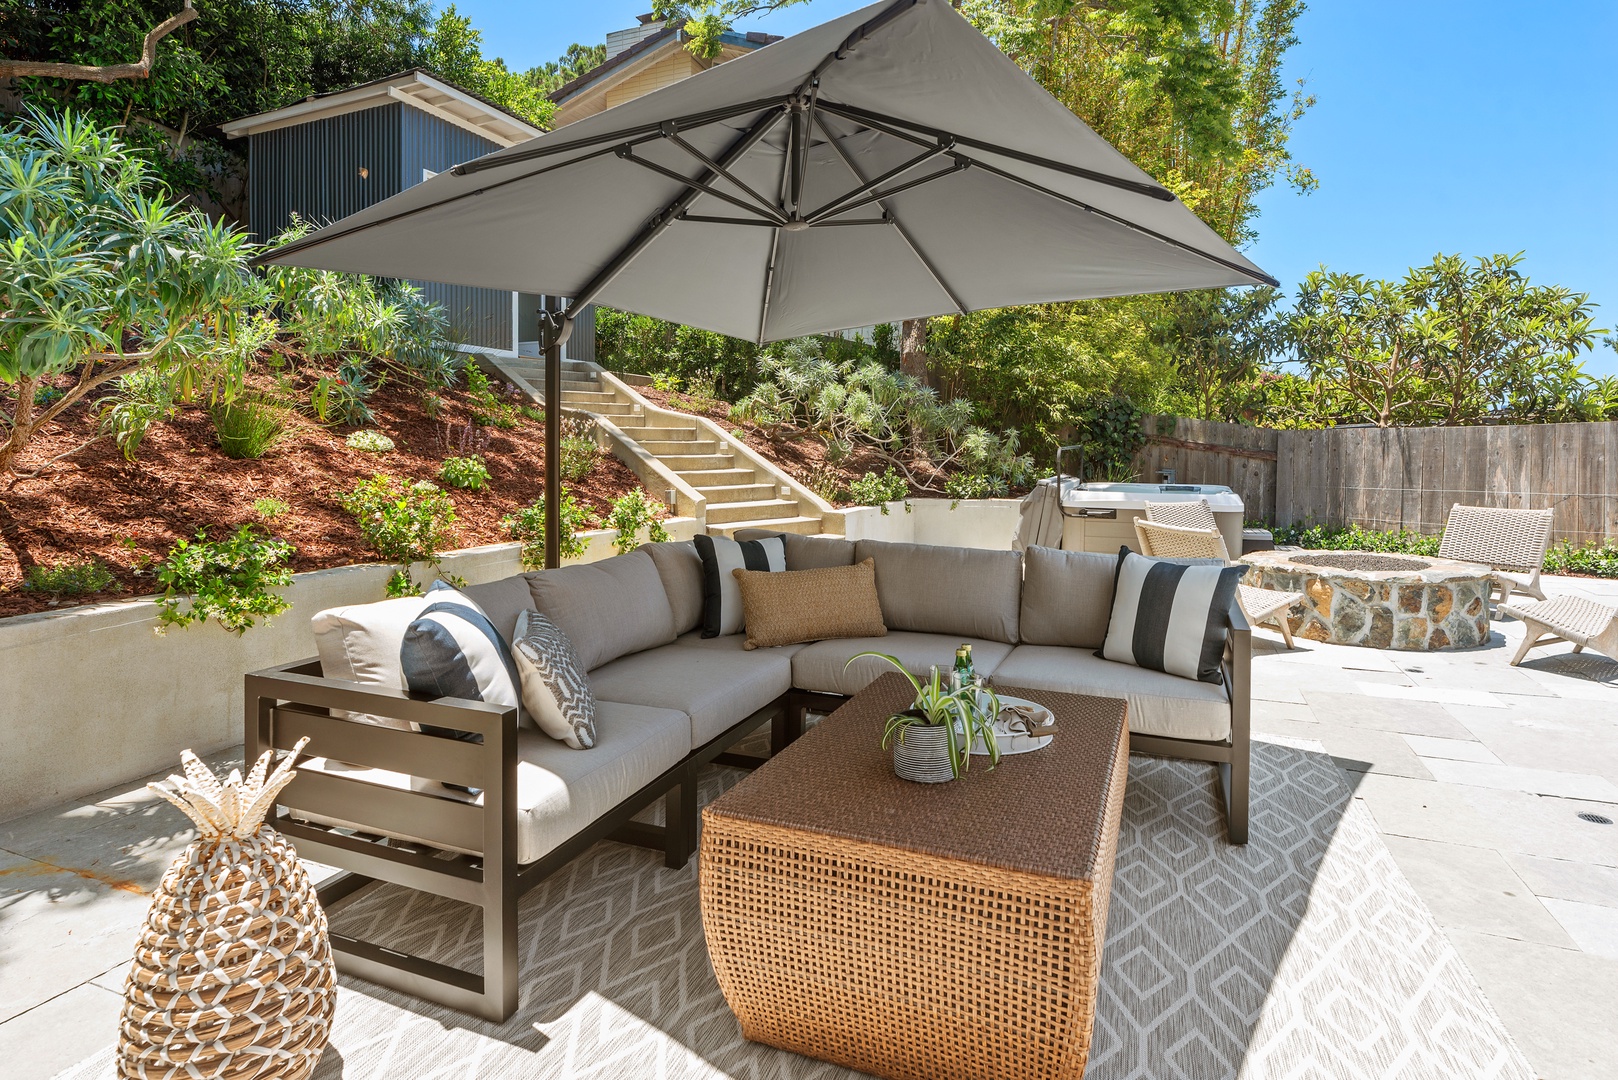 Del Mar Vacation Rentals, Del Mar Zuni Delight - Back patio with dining area, lounge area, firepit, hot tub and private office